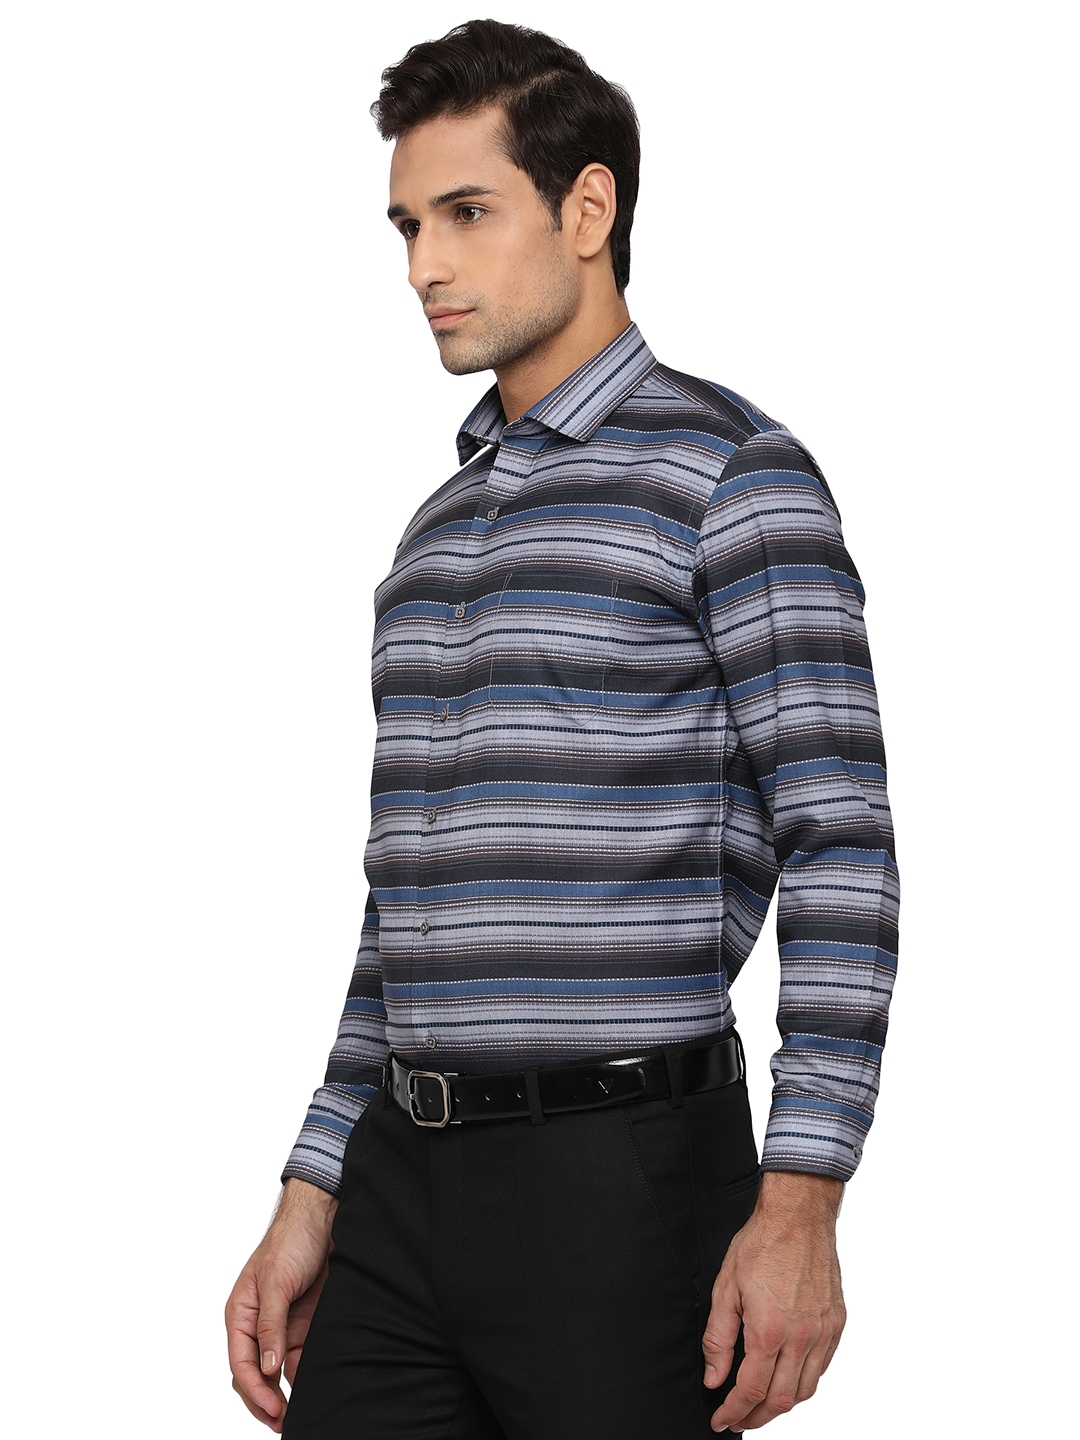 Greenfibre | Grey & Blue Printed Slim Fit Party Wear Shirt | Greenfibre 1